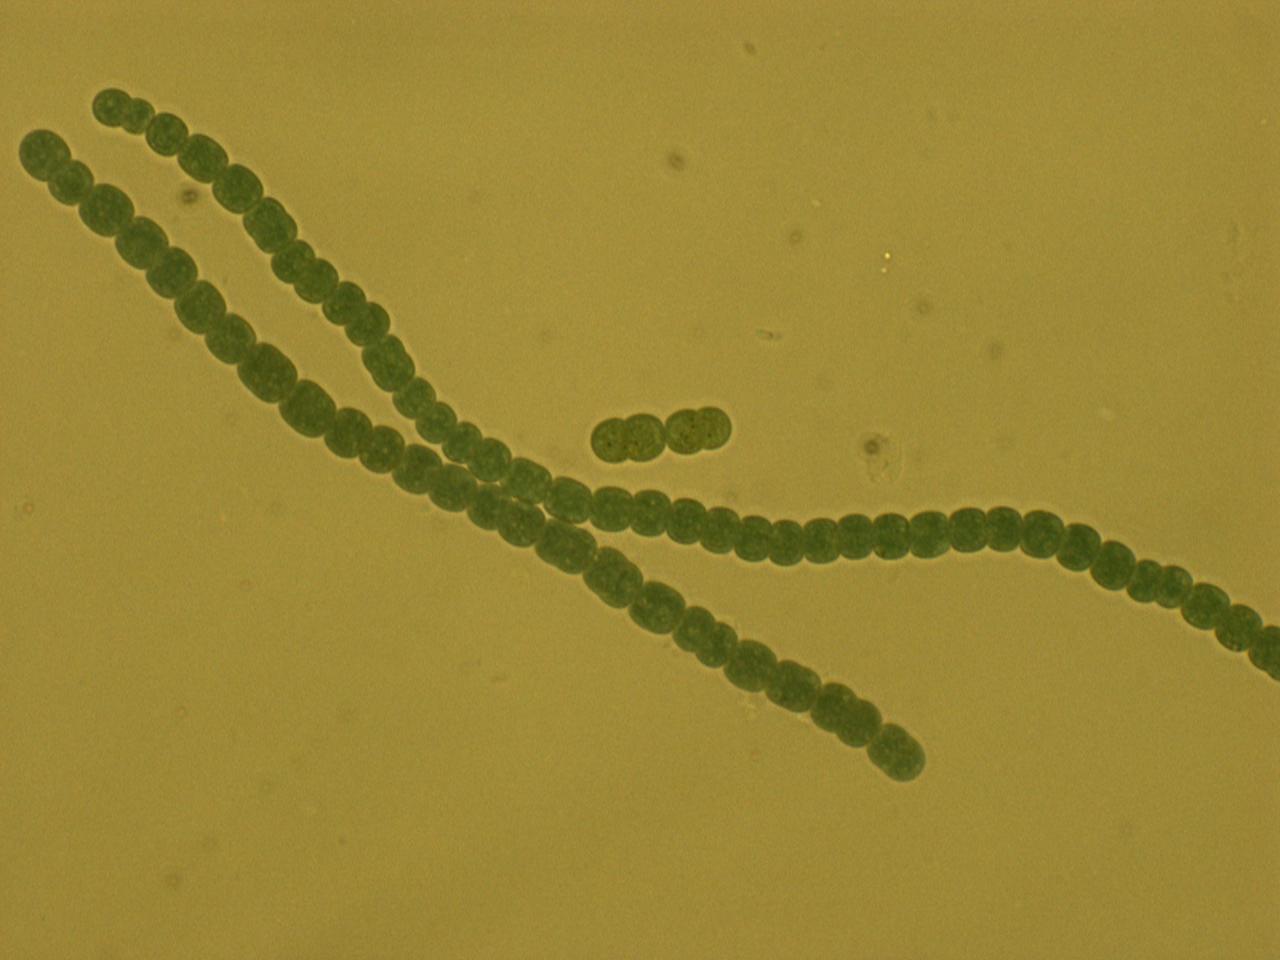 Anabaena 7120 is a filamentous bacterium capable of both photosynthesis and nitrogen fixation. Anabaena forms two cells types along the filament: vegetative cells, which perform photosynthesis, and heterocysts, which fix nitrogen. The nutrients are then shared up and down the chain. In this image, the heterocysts are the slightly larger oblong cells spaced about every eighth cell. Citation